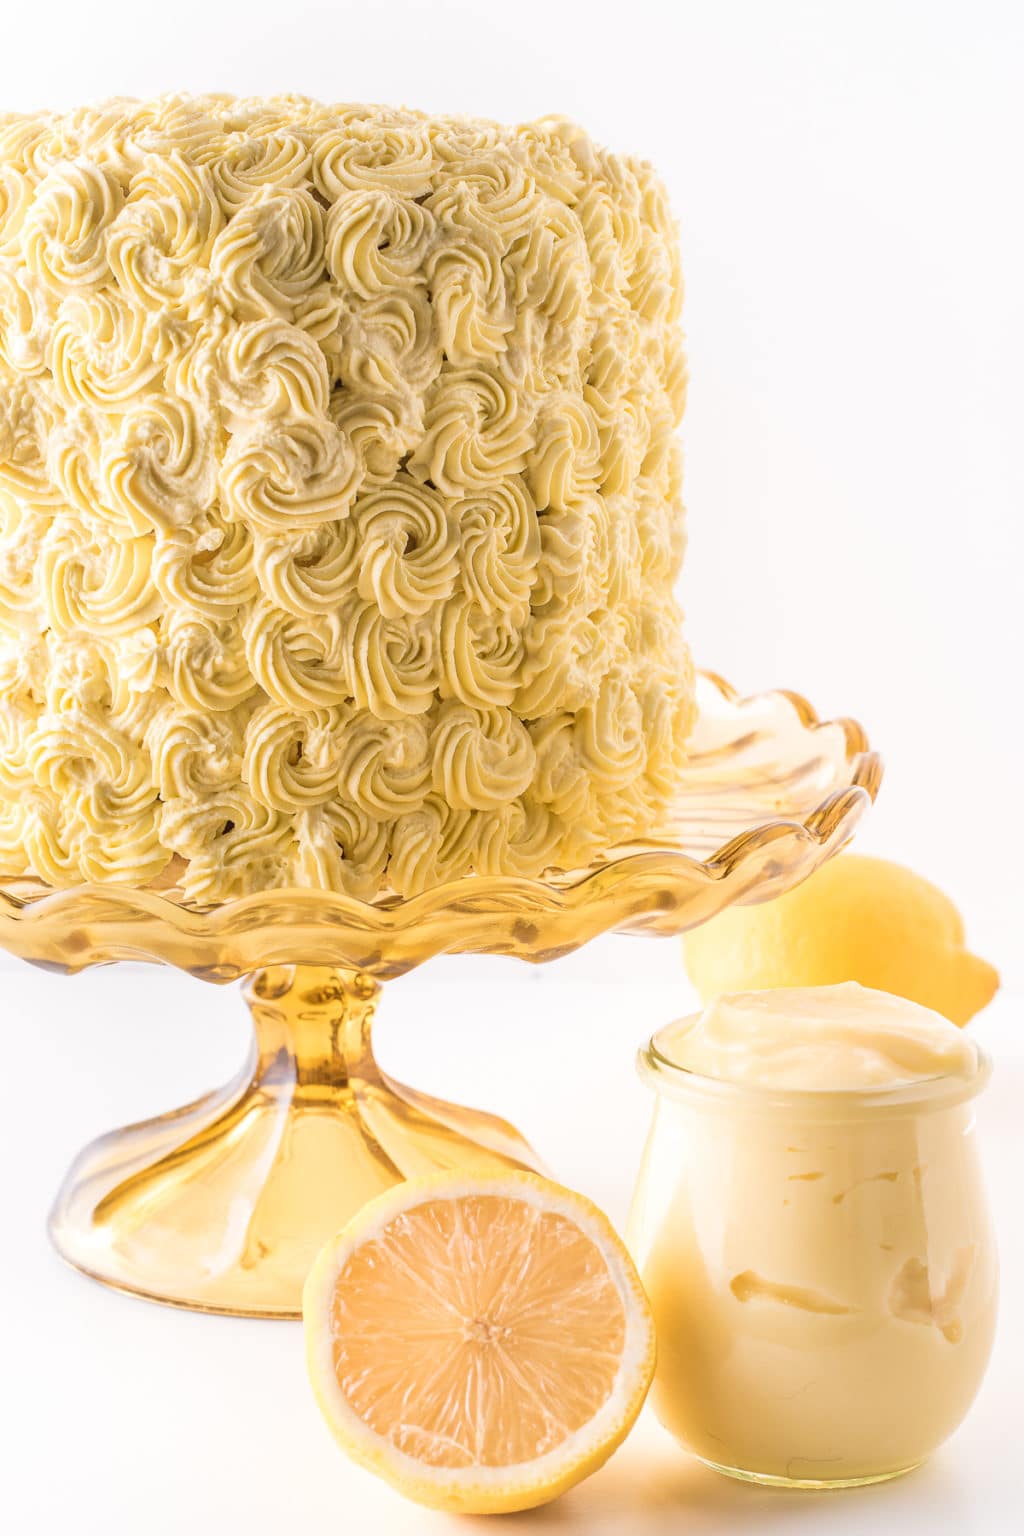 A tall lemon cake with yellow frosting rosettes.